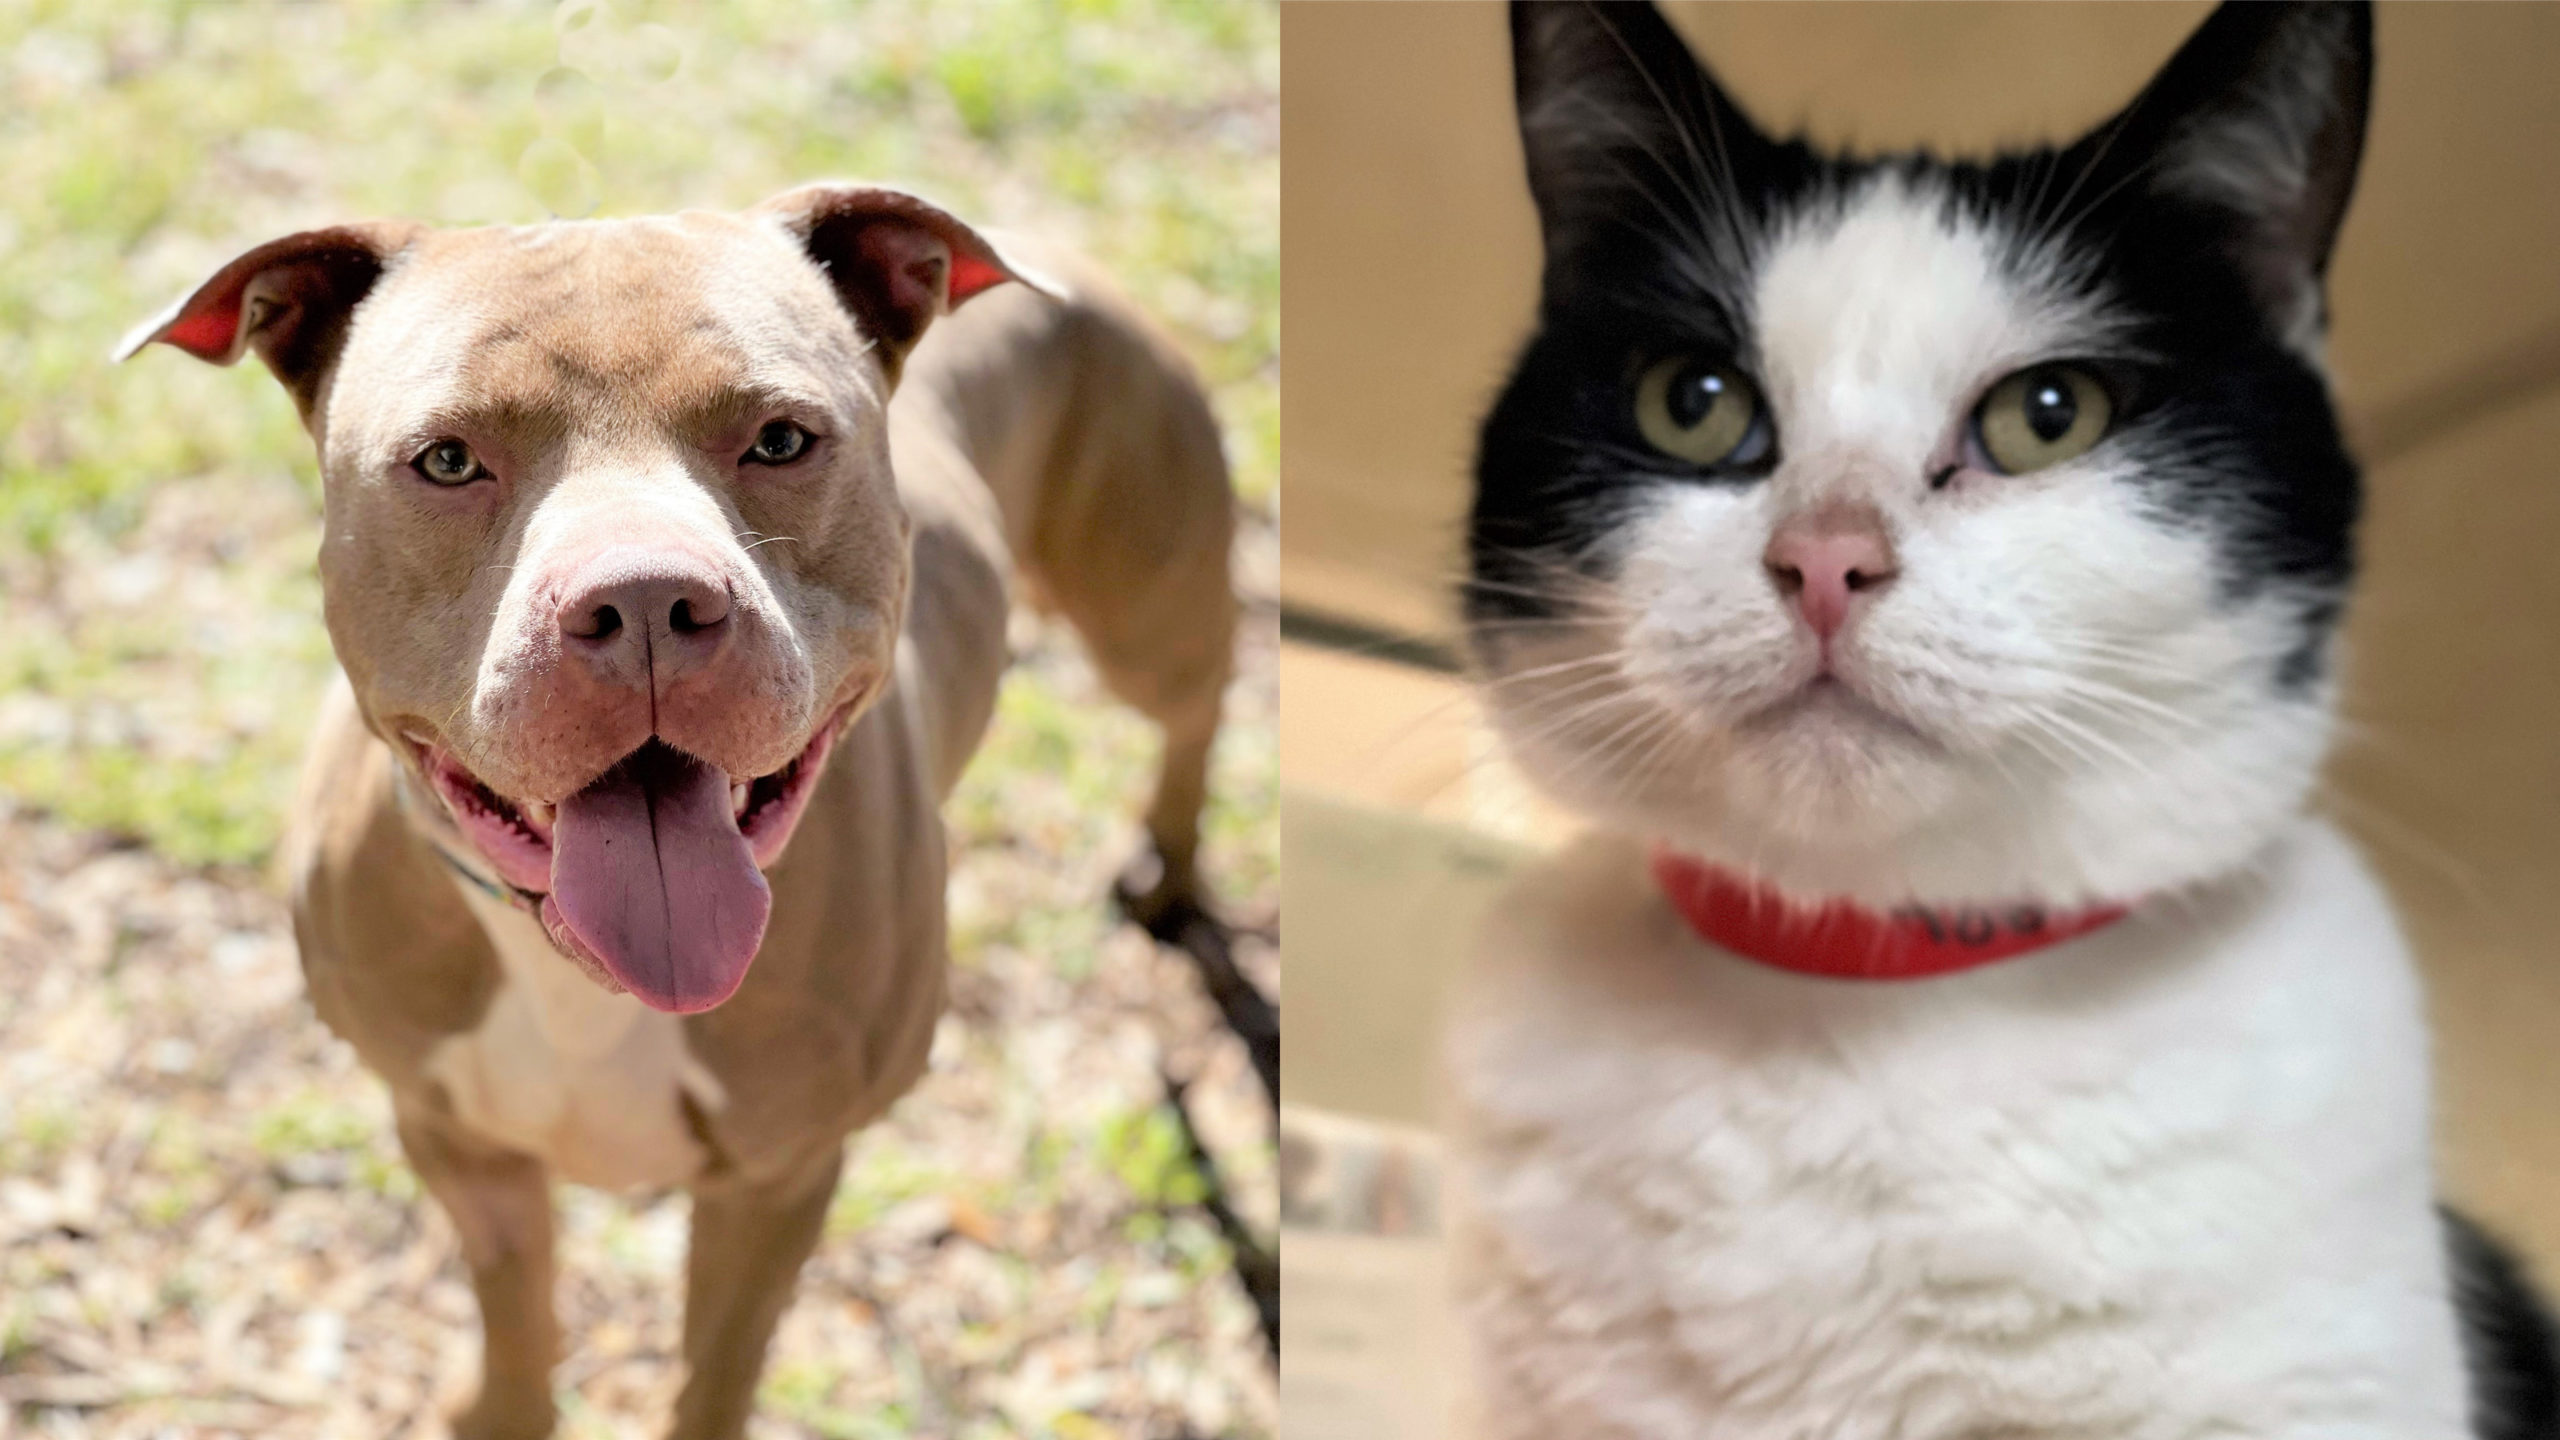 Pets of the Week: Scotty and Double Stuff Are Seeking their Forever Families